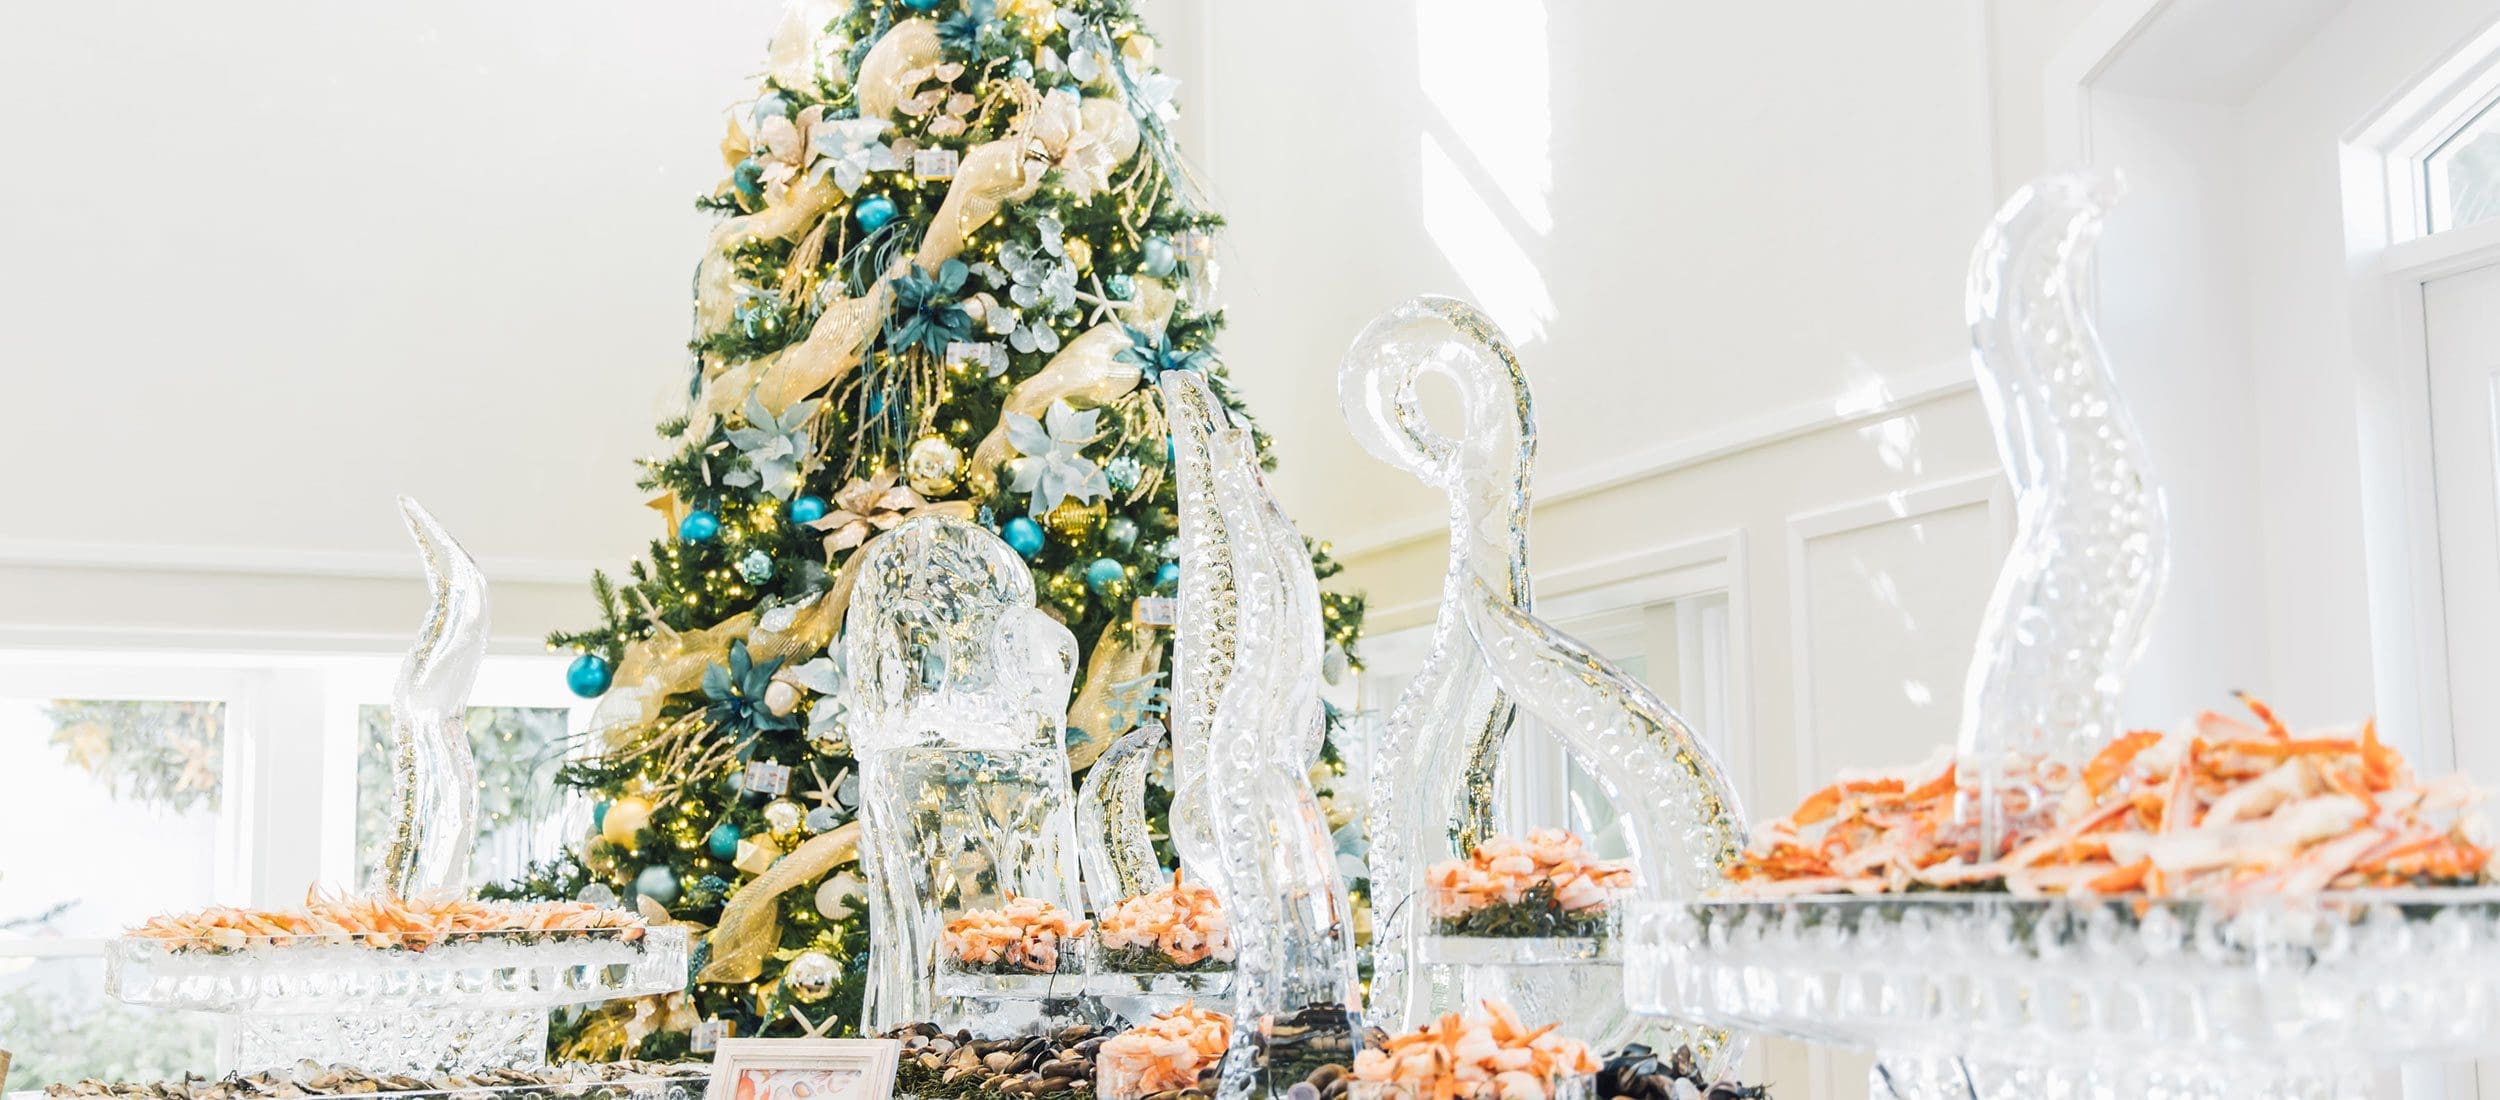 Holiday seafood display and octopus ice sculpture